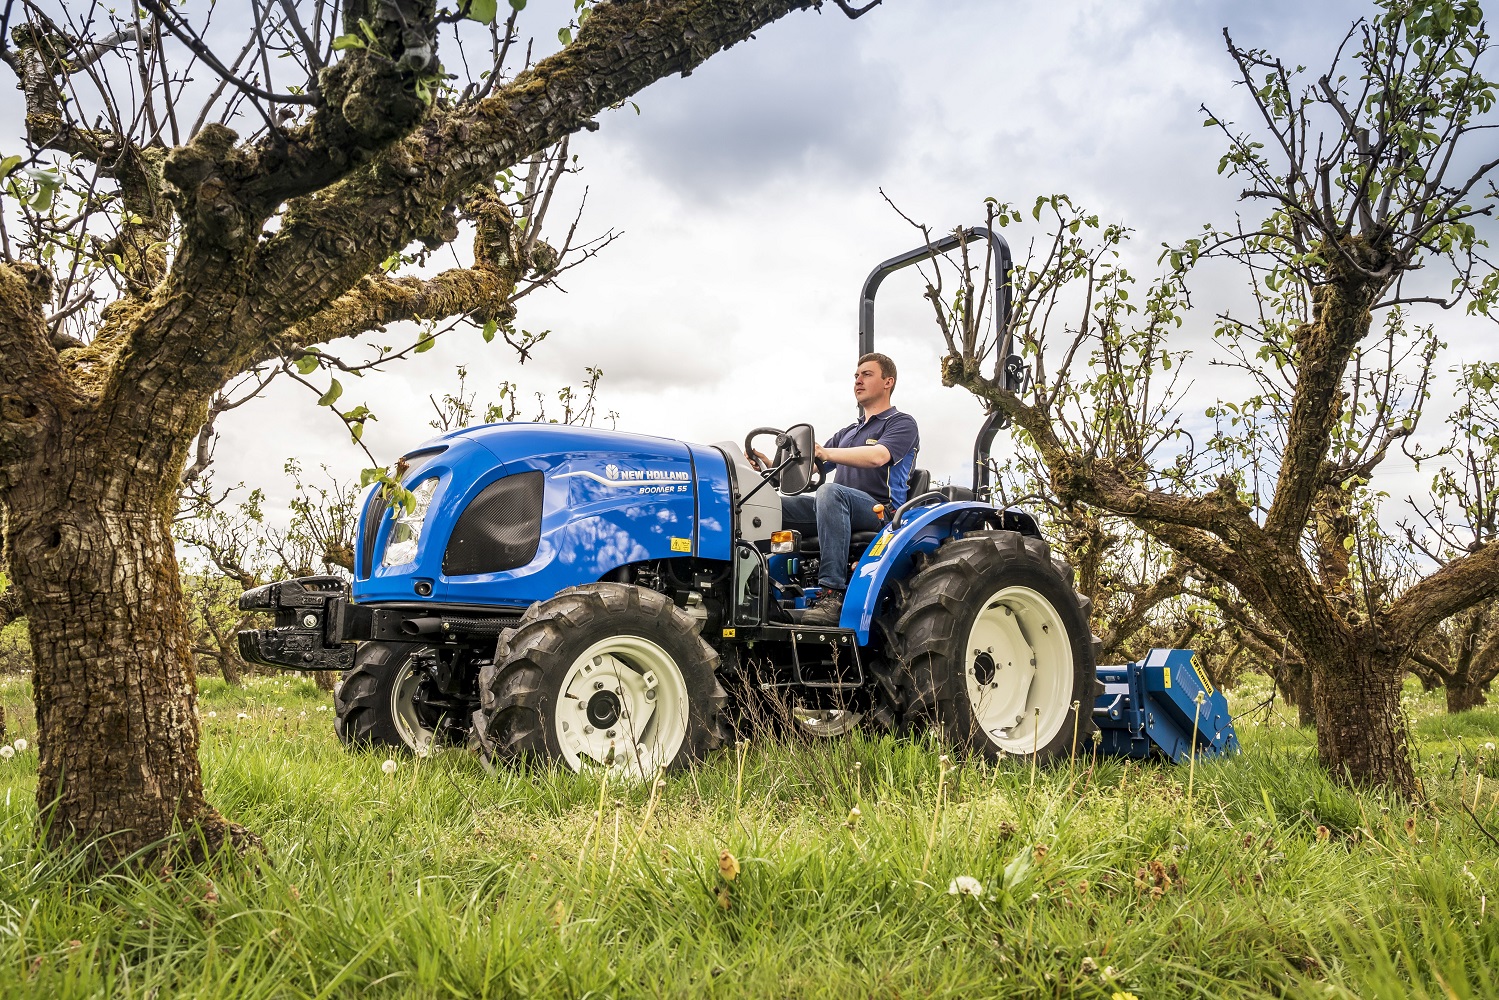 New Holland powers up its compact tractor offering with launch of Stage V Boomer range